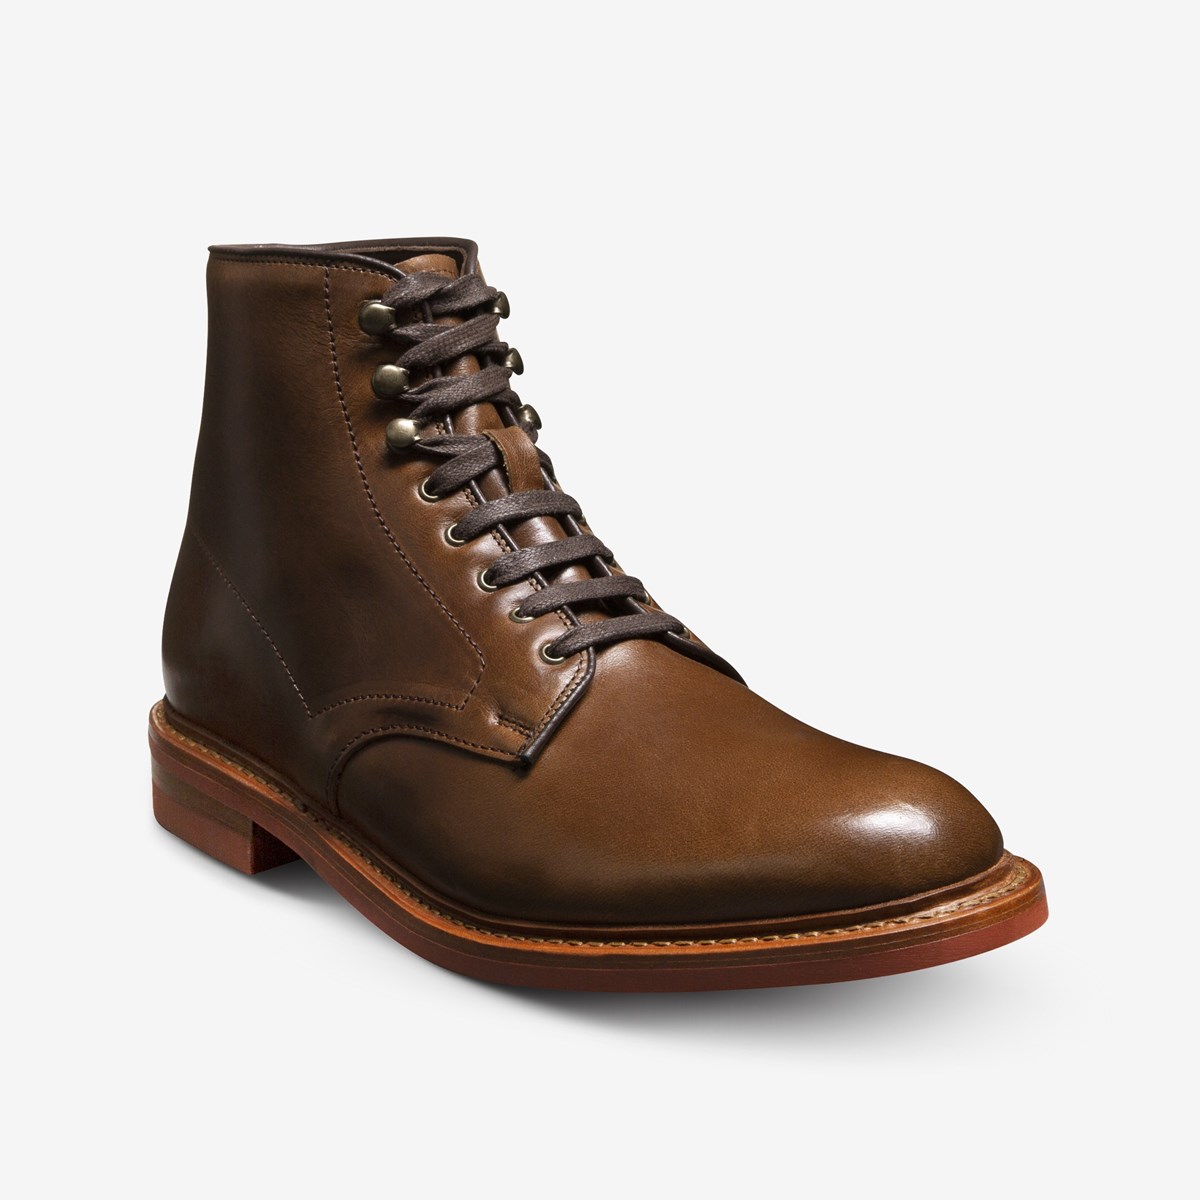 Higgins Mill Weatherproof Boot with Chromexcel Leather | Men's Boots ...